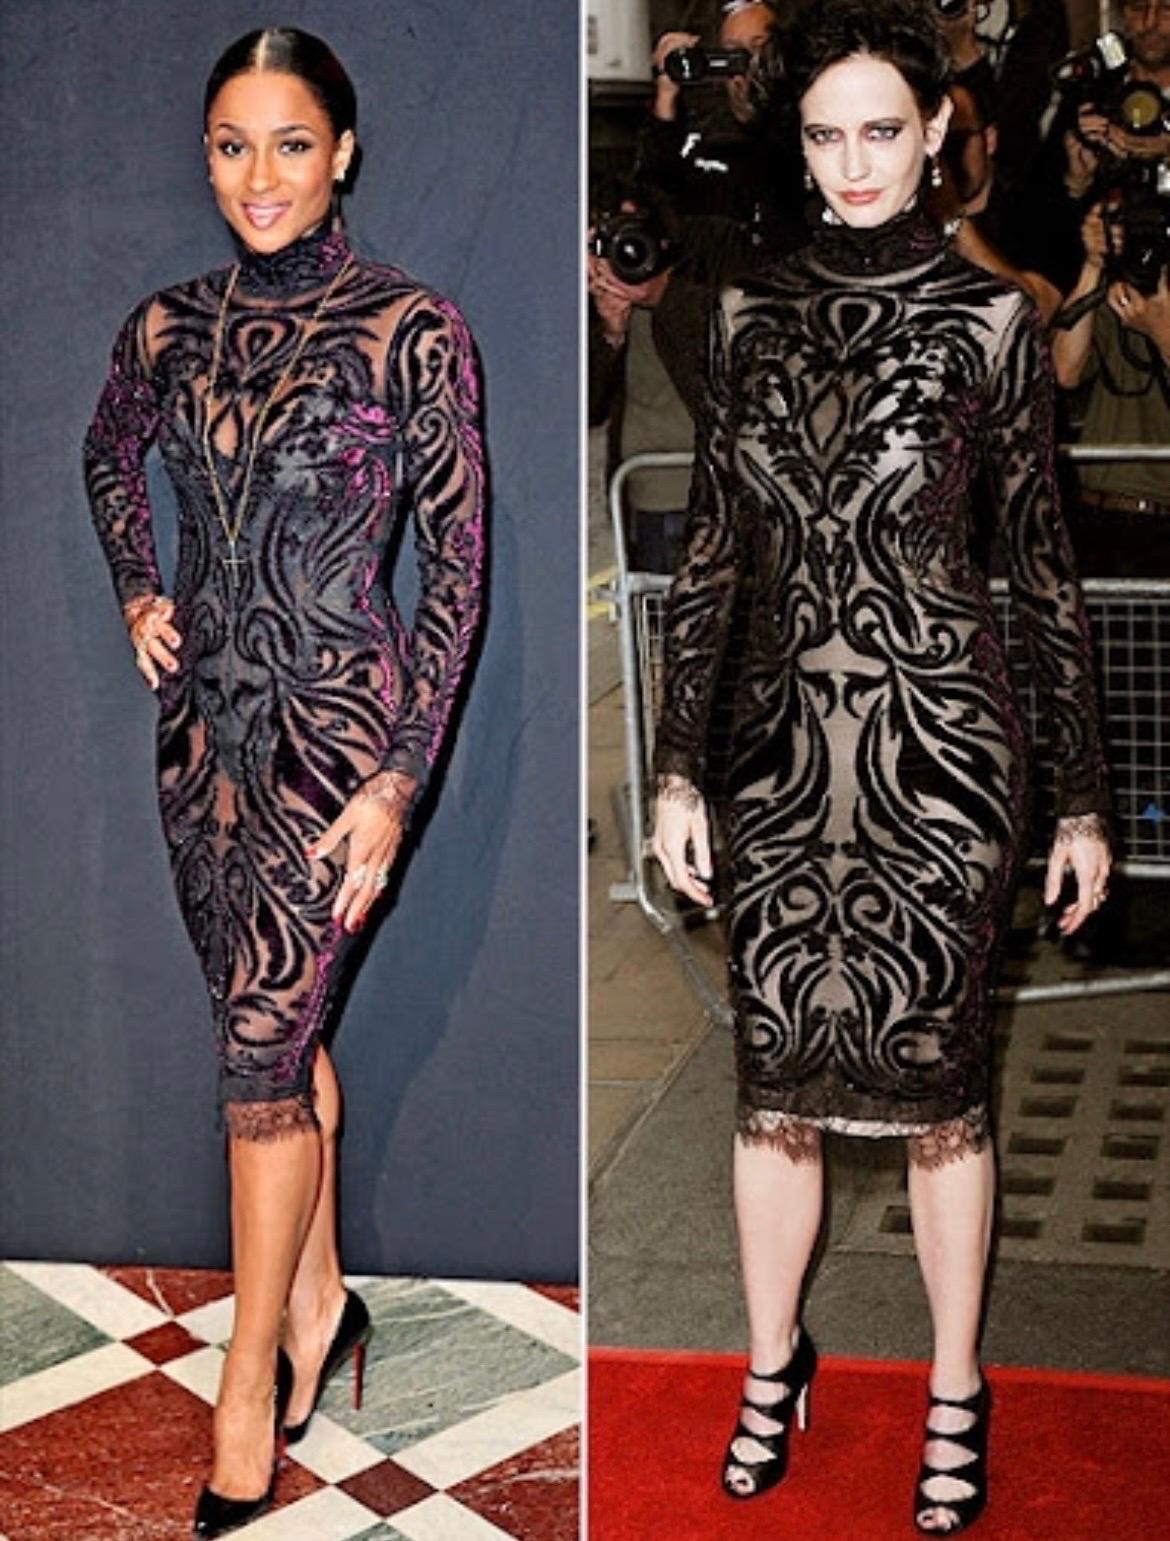 Emilio Pucci dress as seen on Eva Green and Ciara.

The sweeping organic lines that define the Emilio Pucci aesthetic delight and beguile, but a lace, chiffon, and Bordeaux velvet-embroidered dress is something that defies explanation—its pure,